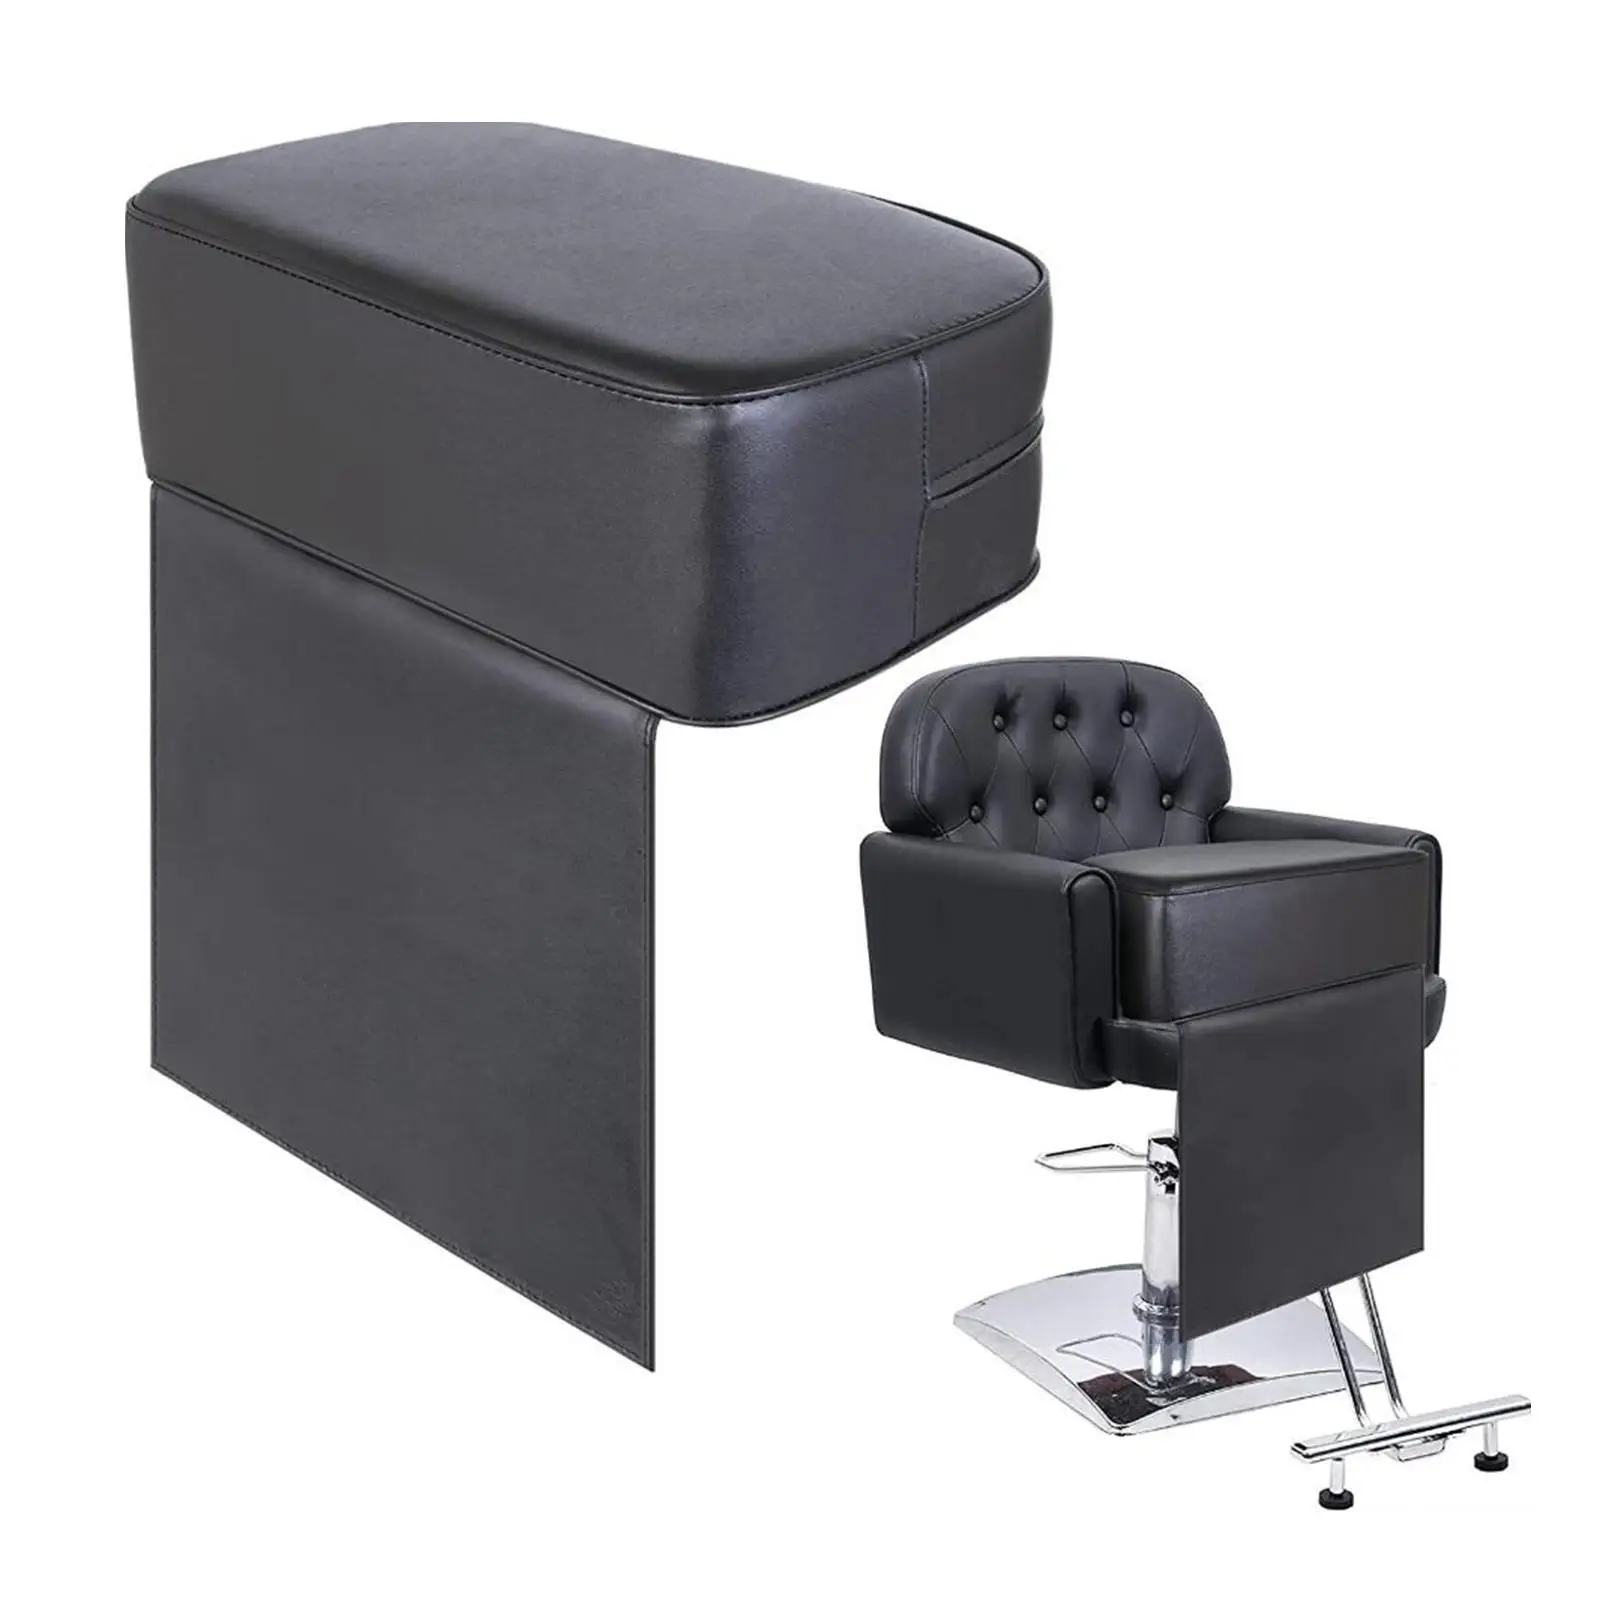 Salon Booster Seat Cushion Soft PU Leather Comfortable Styling Chair Cushion Salon SPA Equipment for Stylists Home Barbers Clubs